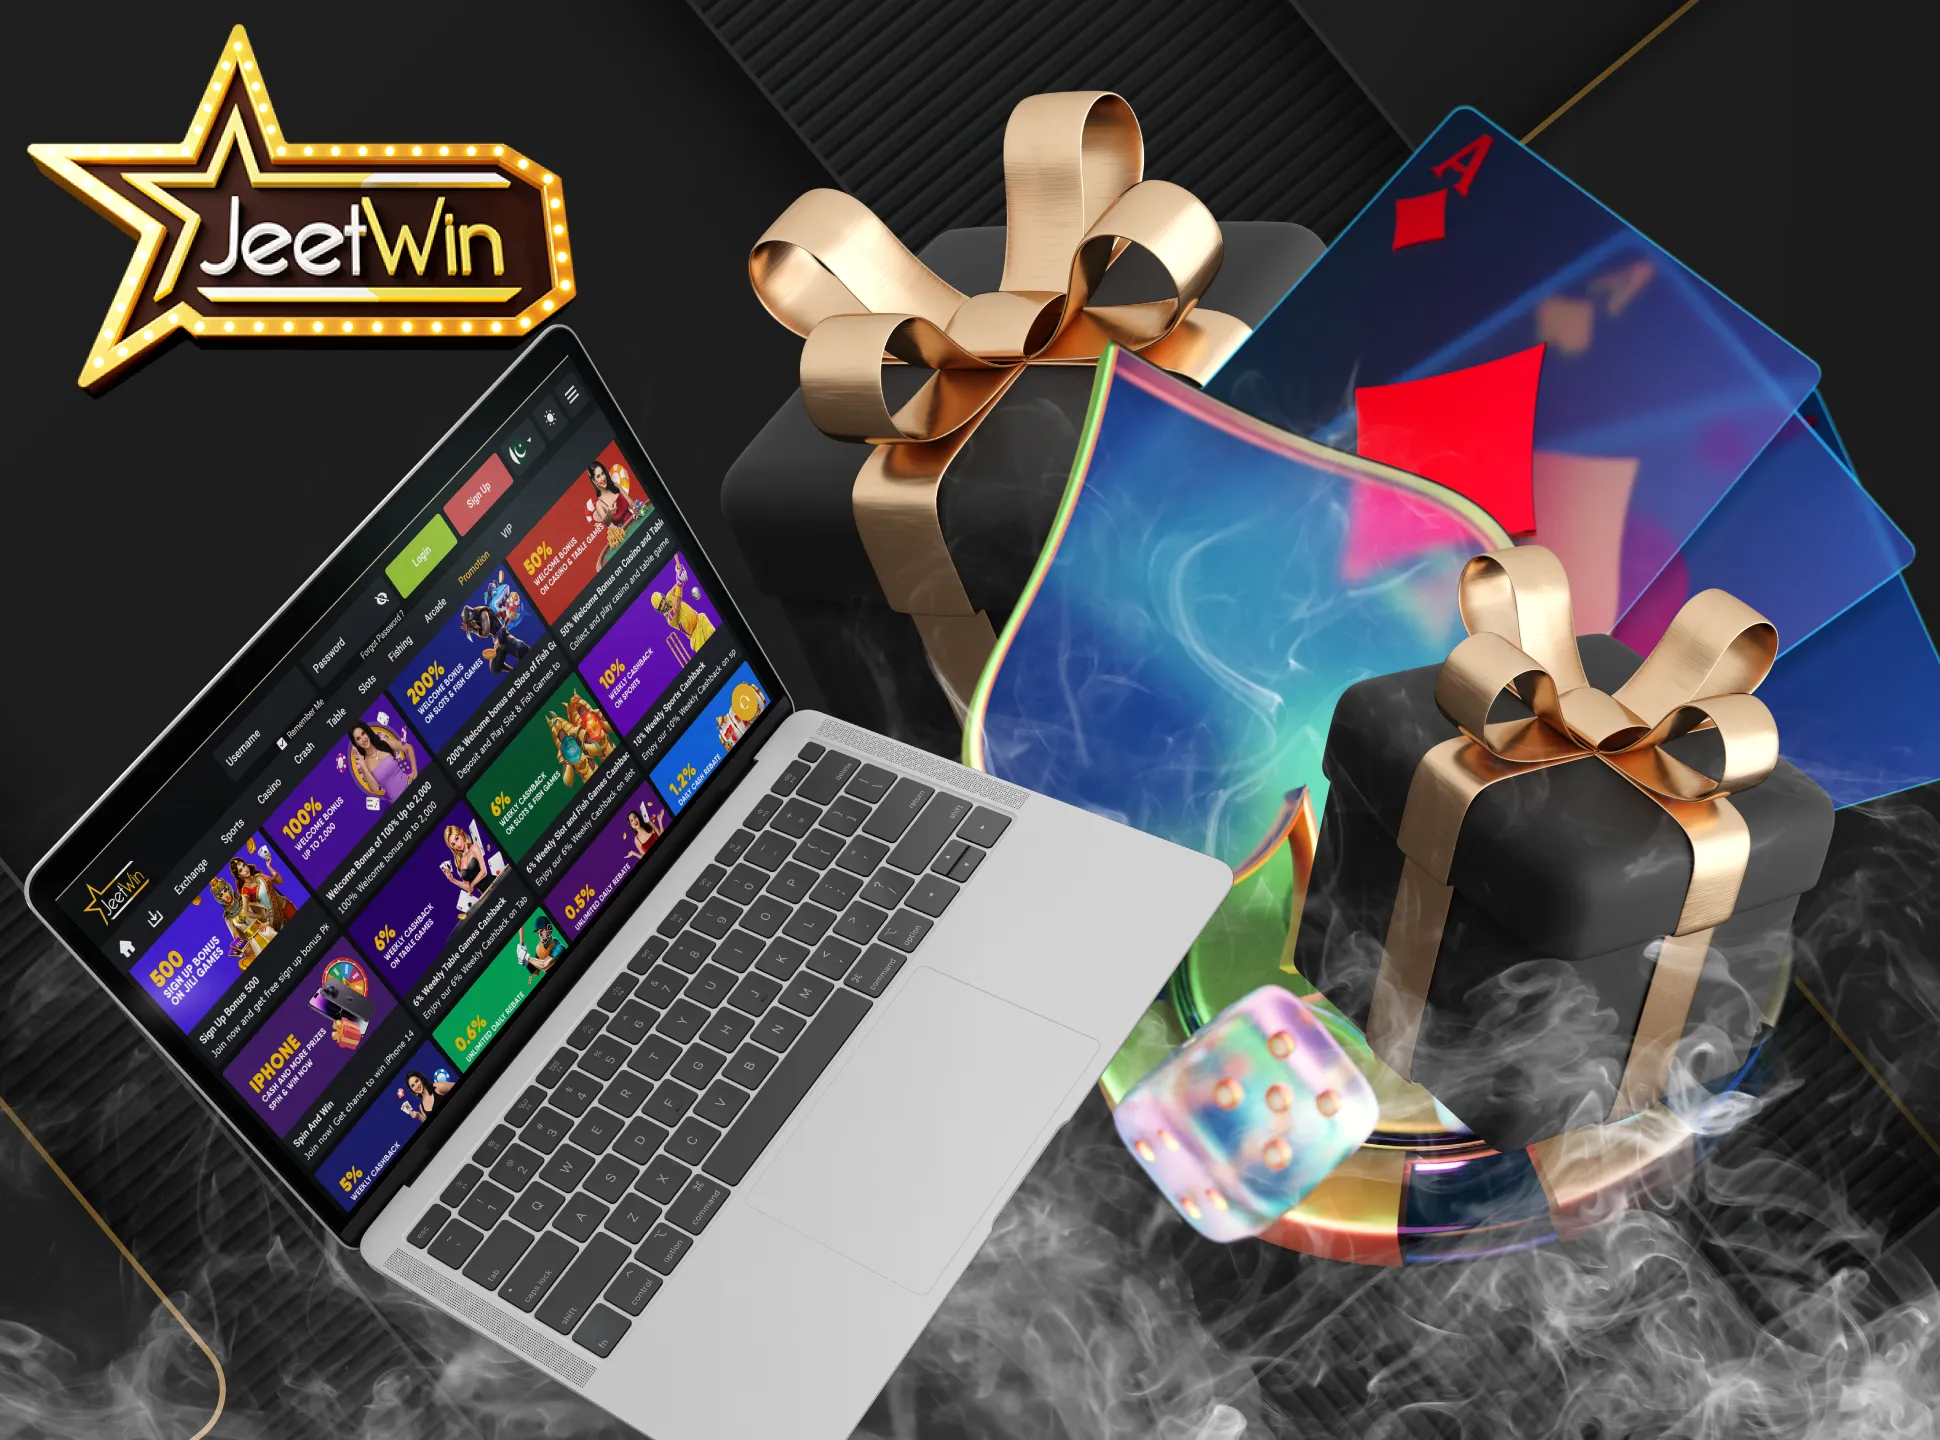 Sign up on JeetWin website and get bonus.